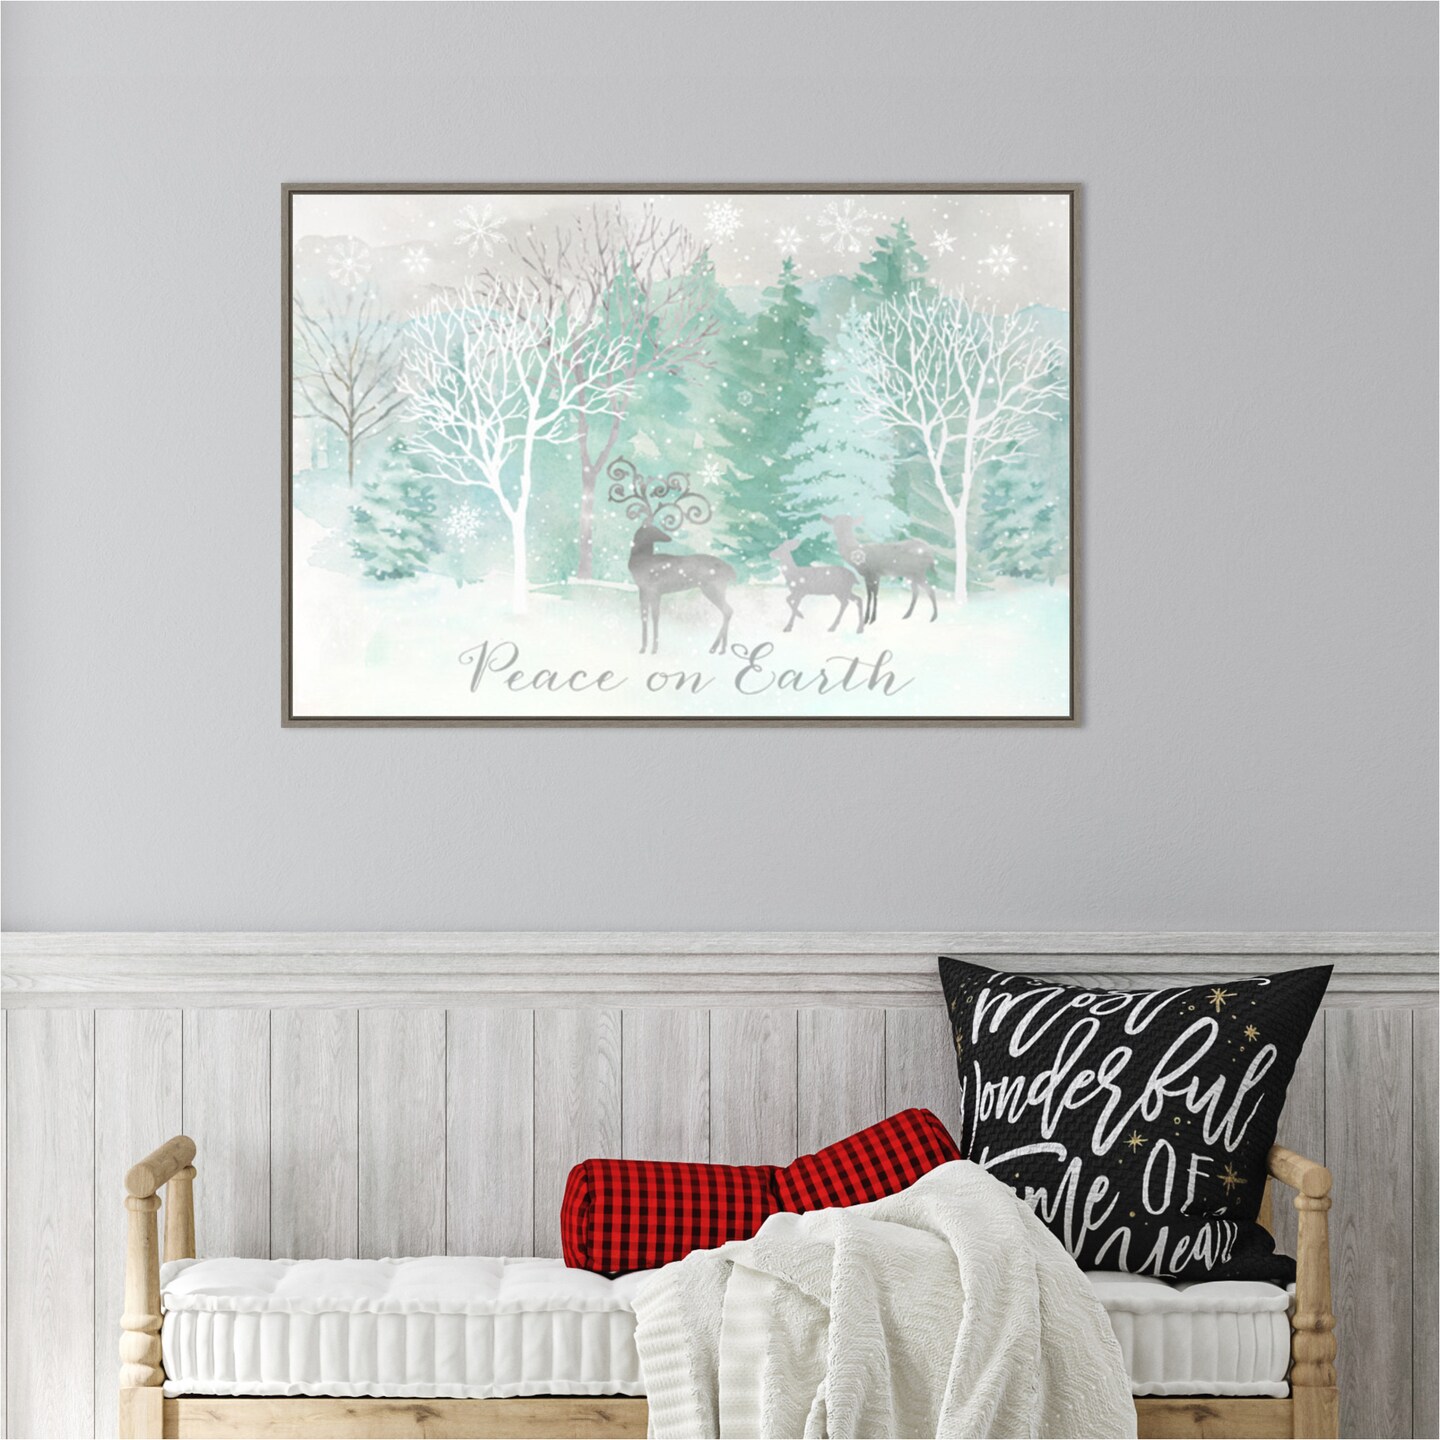 Peace on Earth Silver landscape by Cynthia Coulter 33-in. W x 23-in. H. Canvas Wall Art Print Framed in Grey